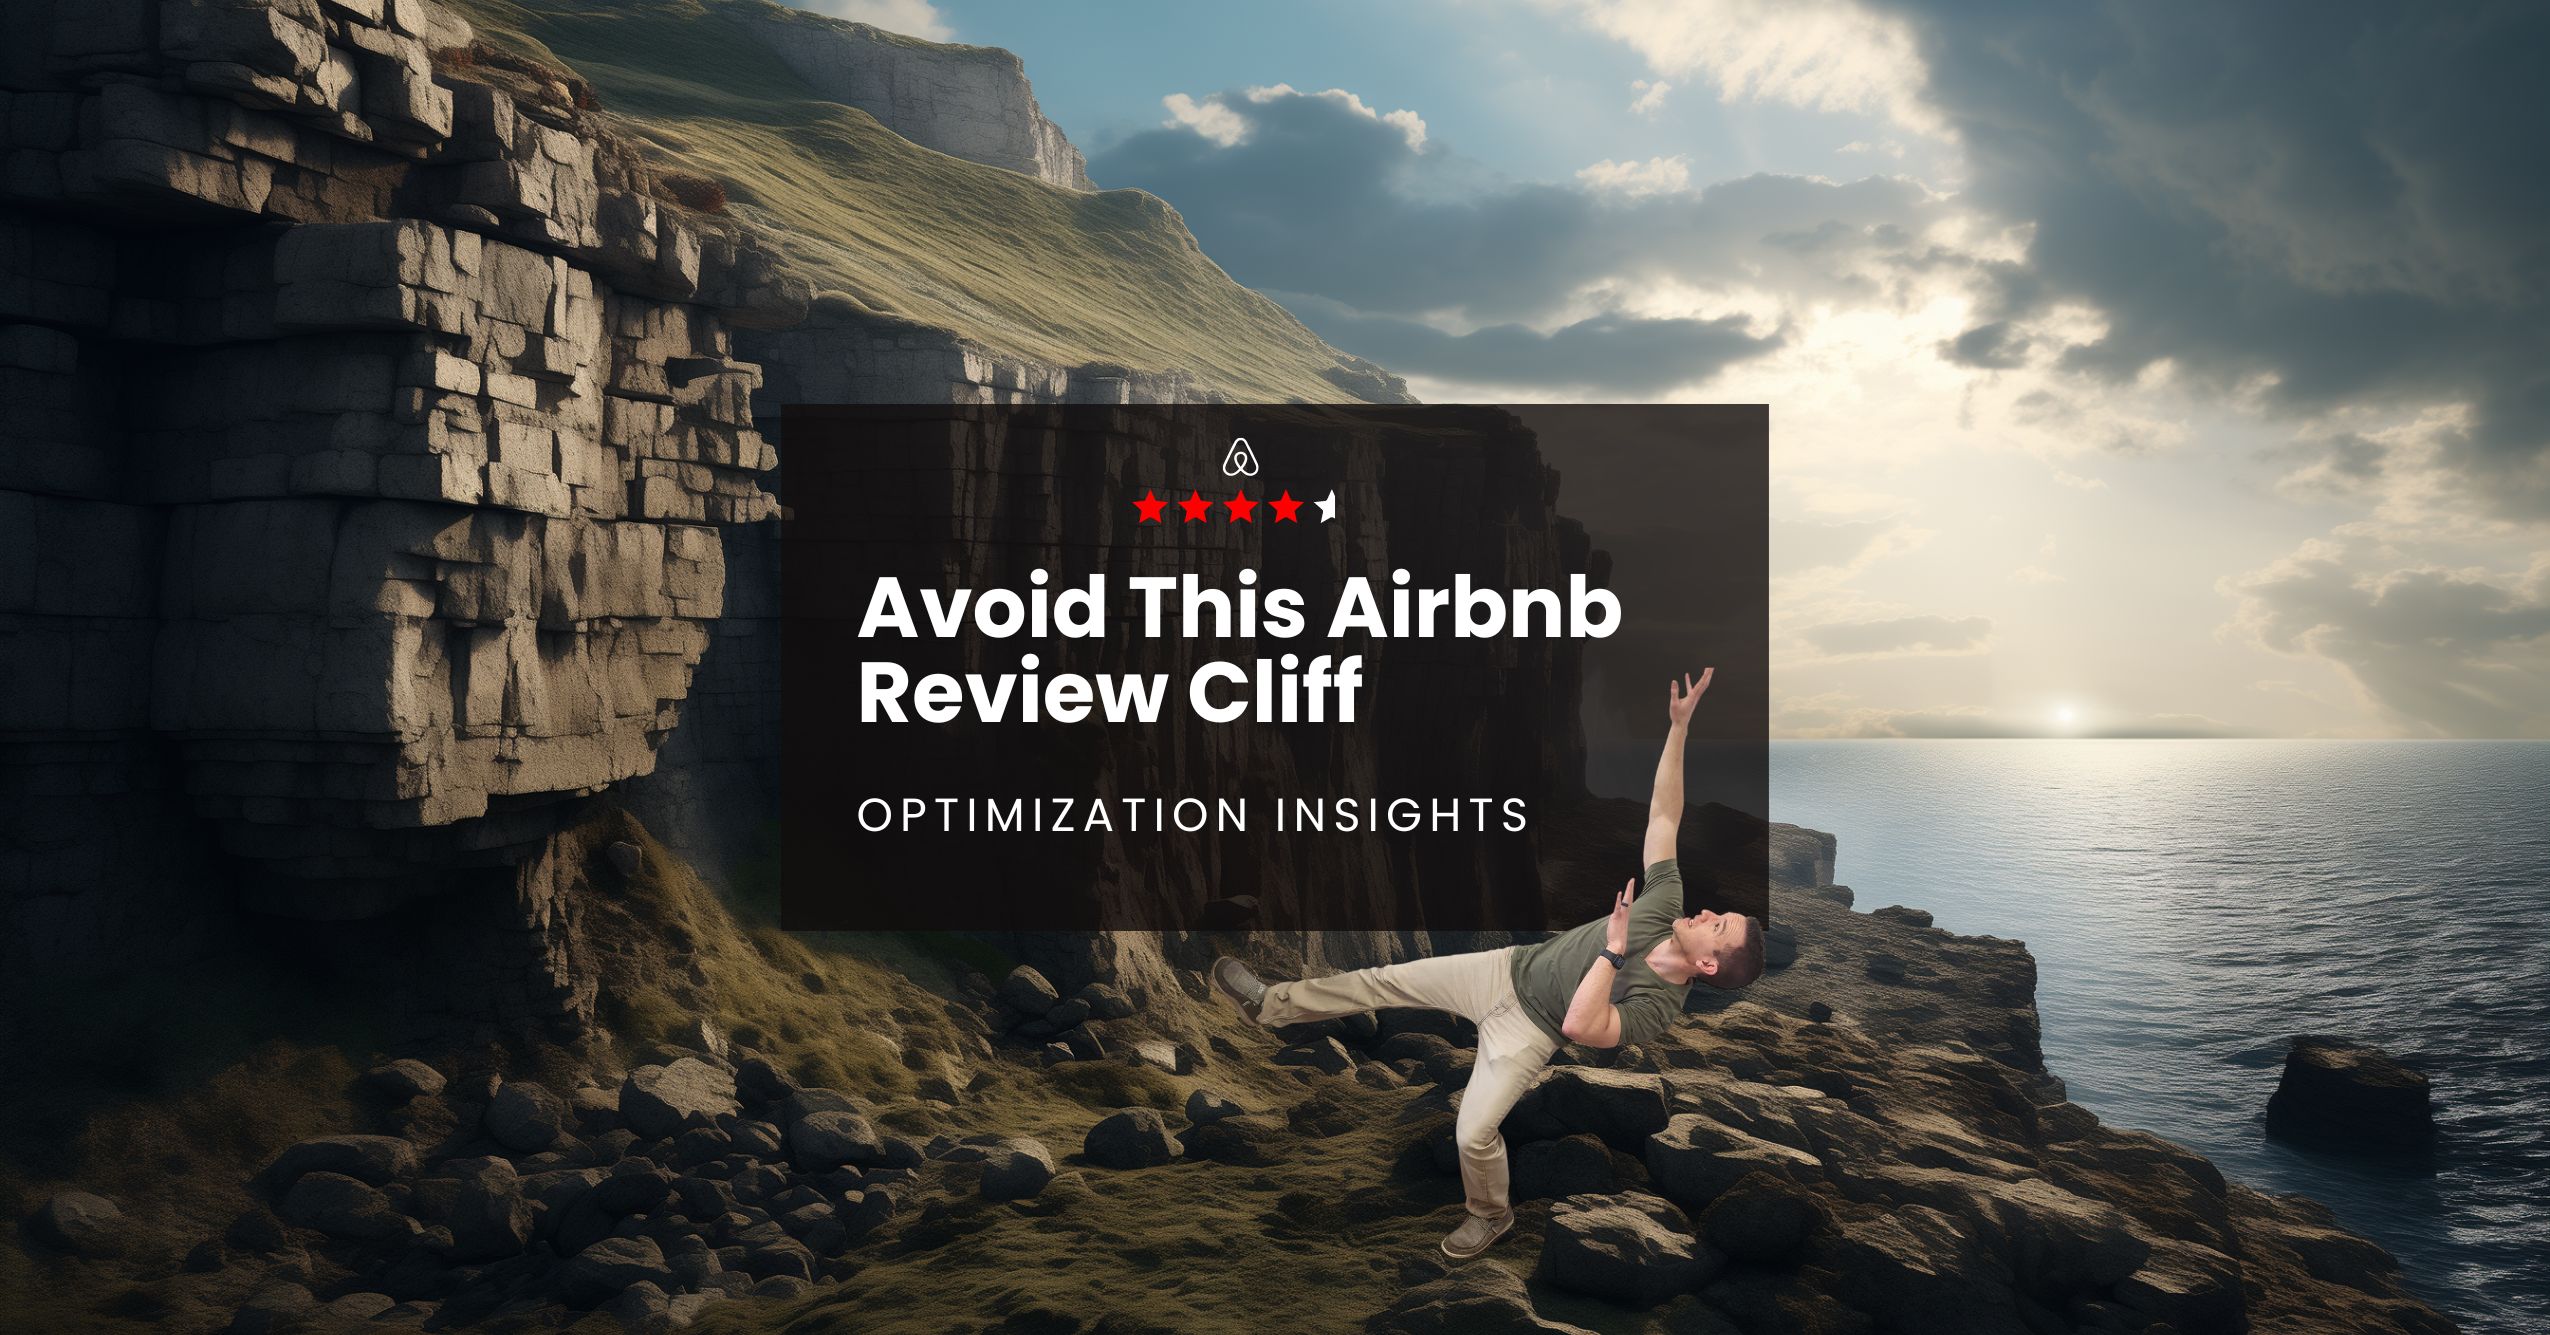 title page of blog post about airbnb review cliff